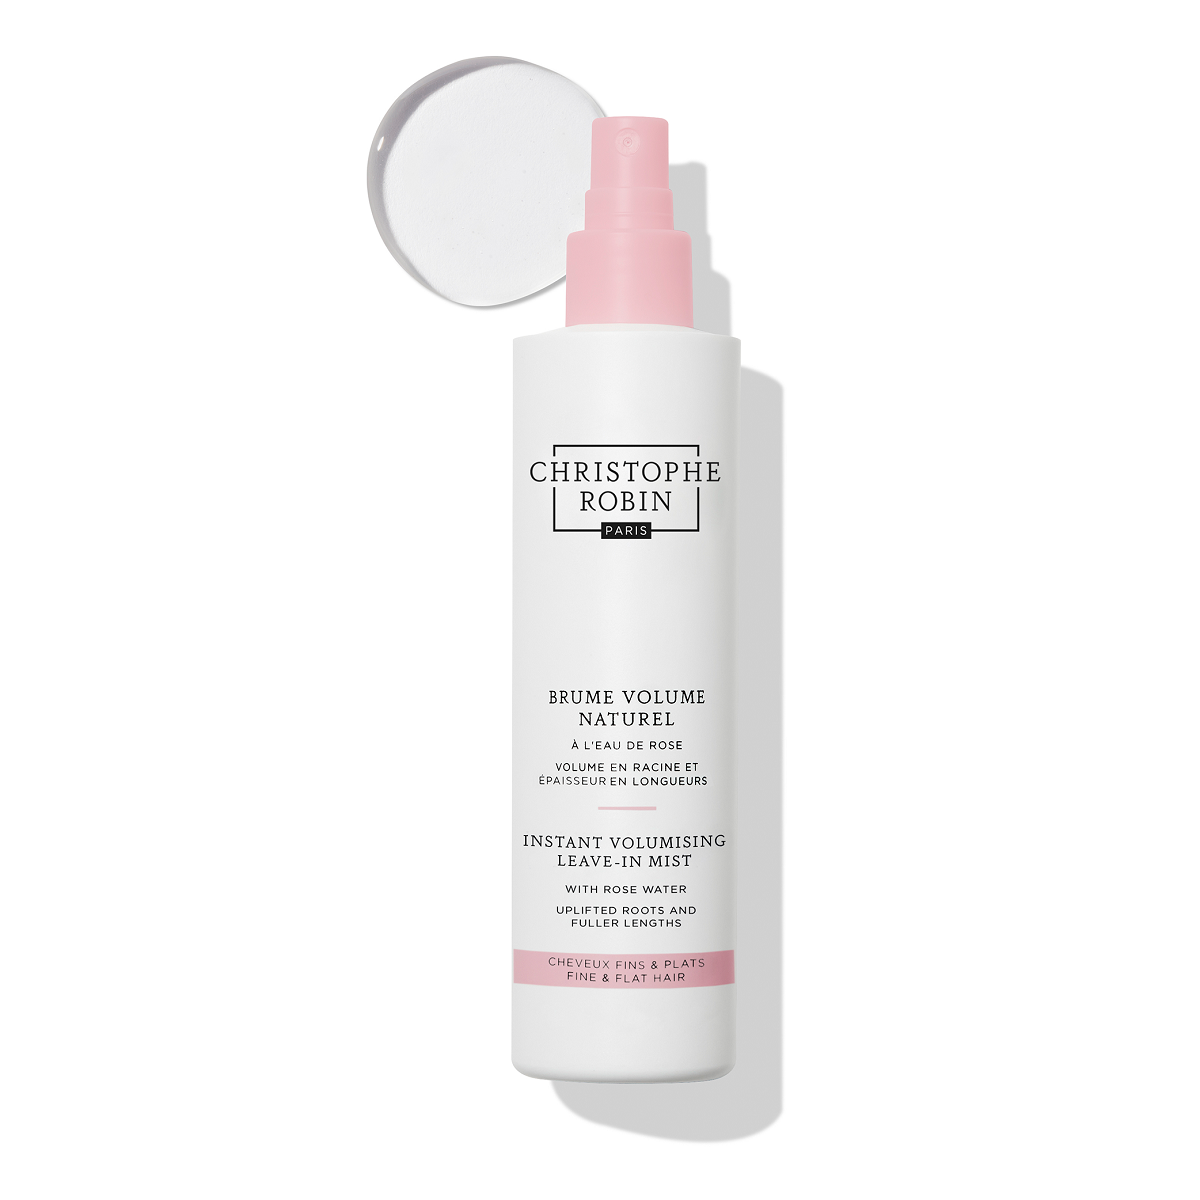 Christophe Robin Instant Volumizing Leave-in Mist with Rose Water